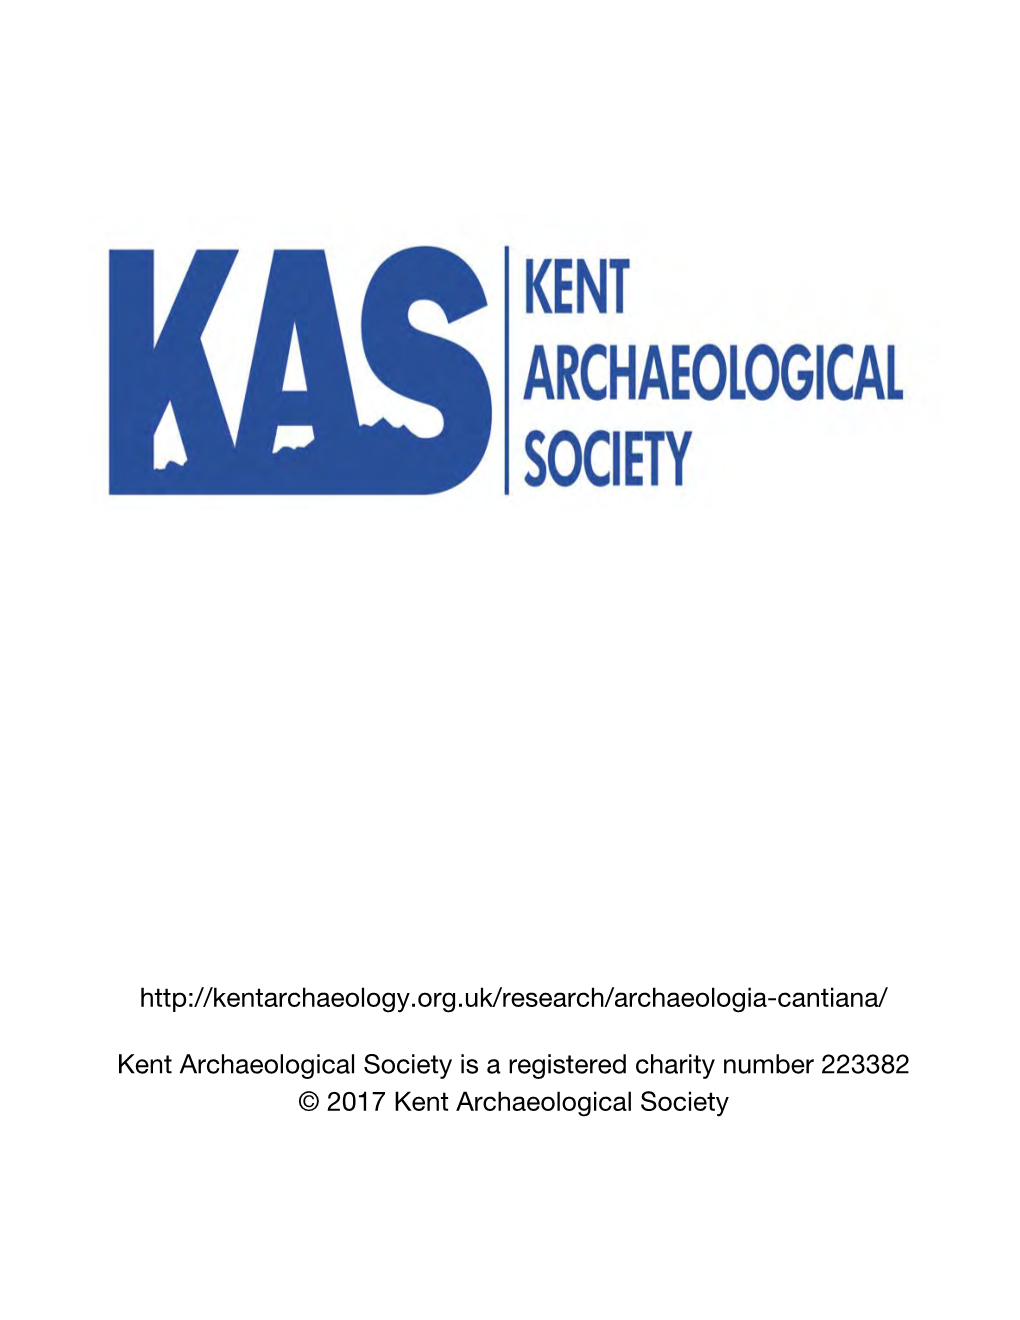 Annual Bibliography of Kentish Archaeology and History 2006